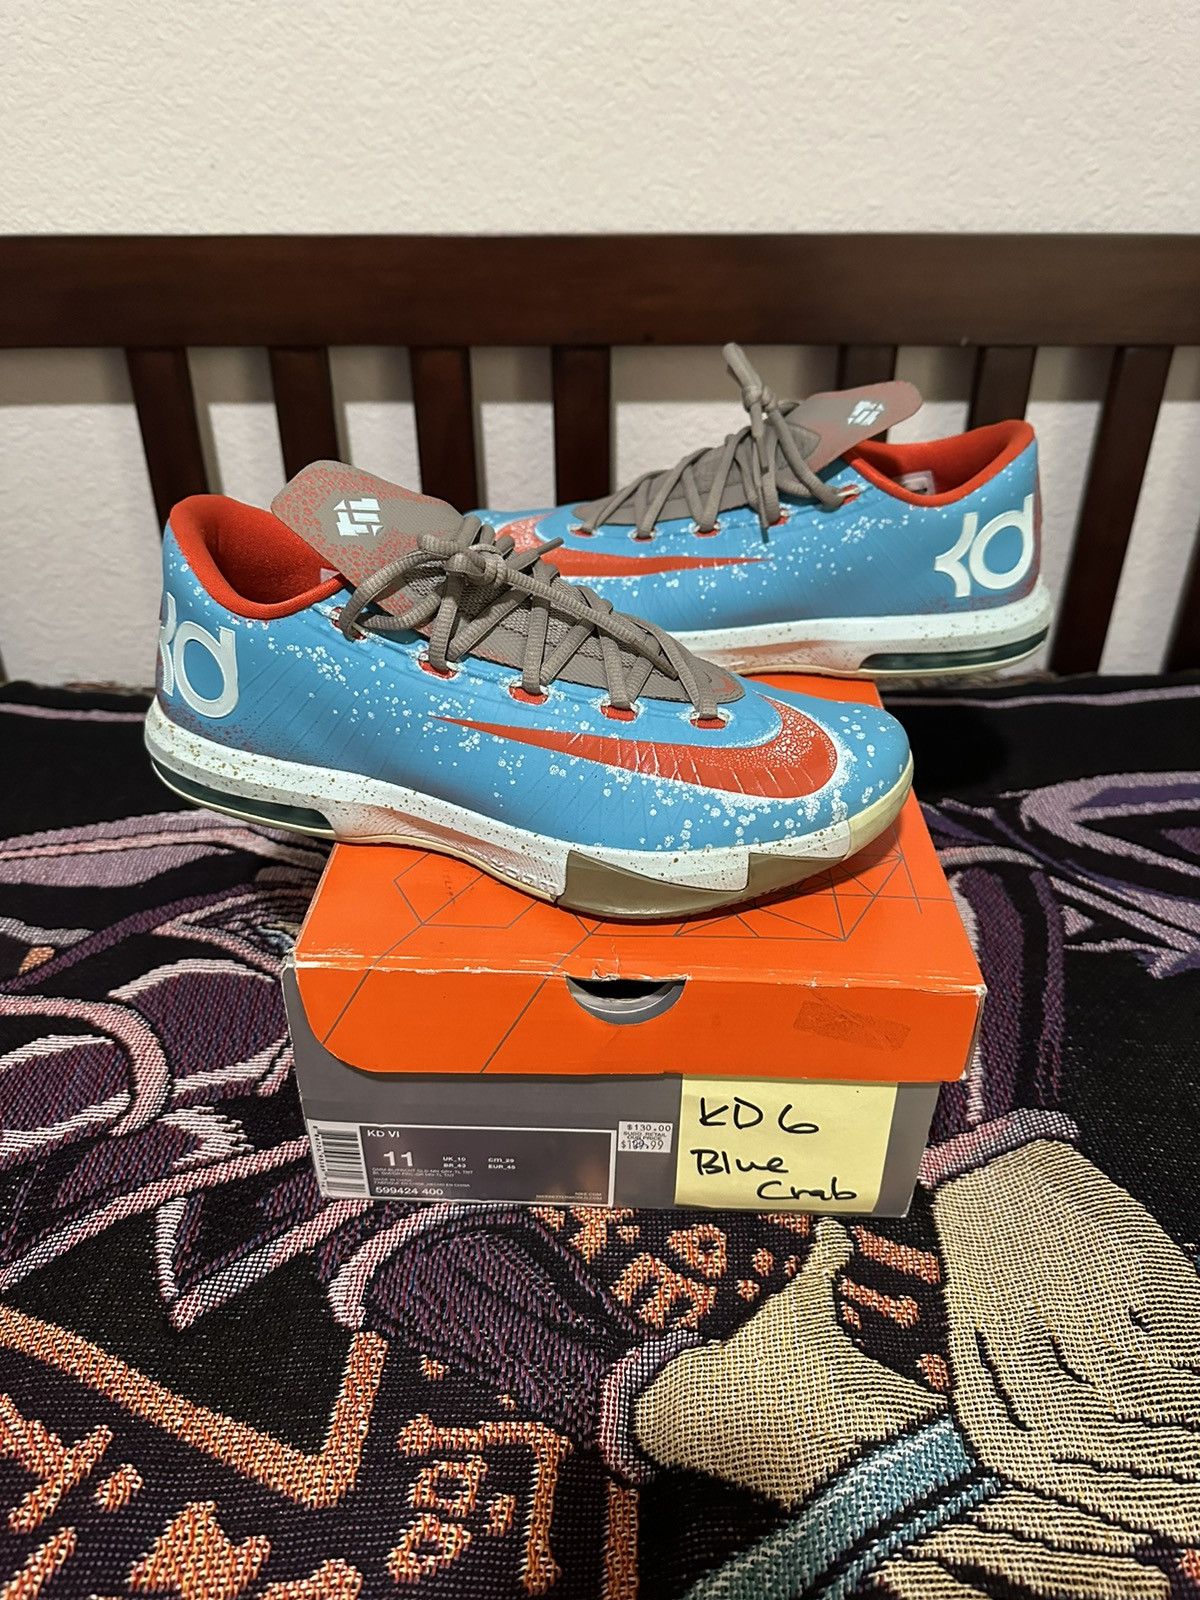 Pre-owned Nike Kd 6 Maryland Blue Crab 2013 Kevin Durant Shoes